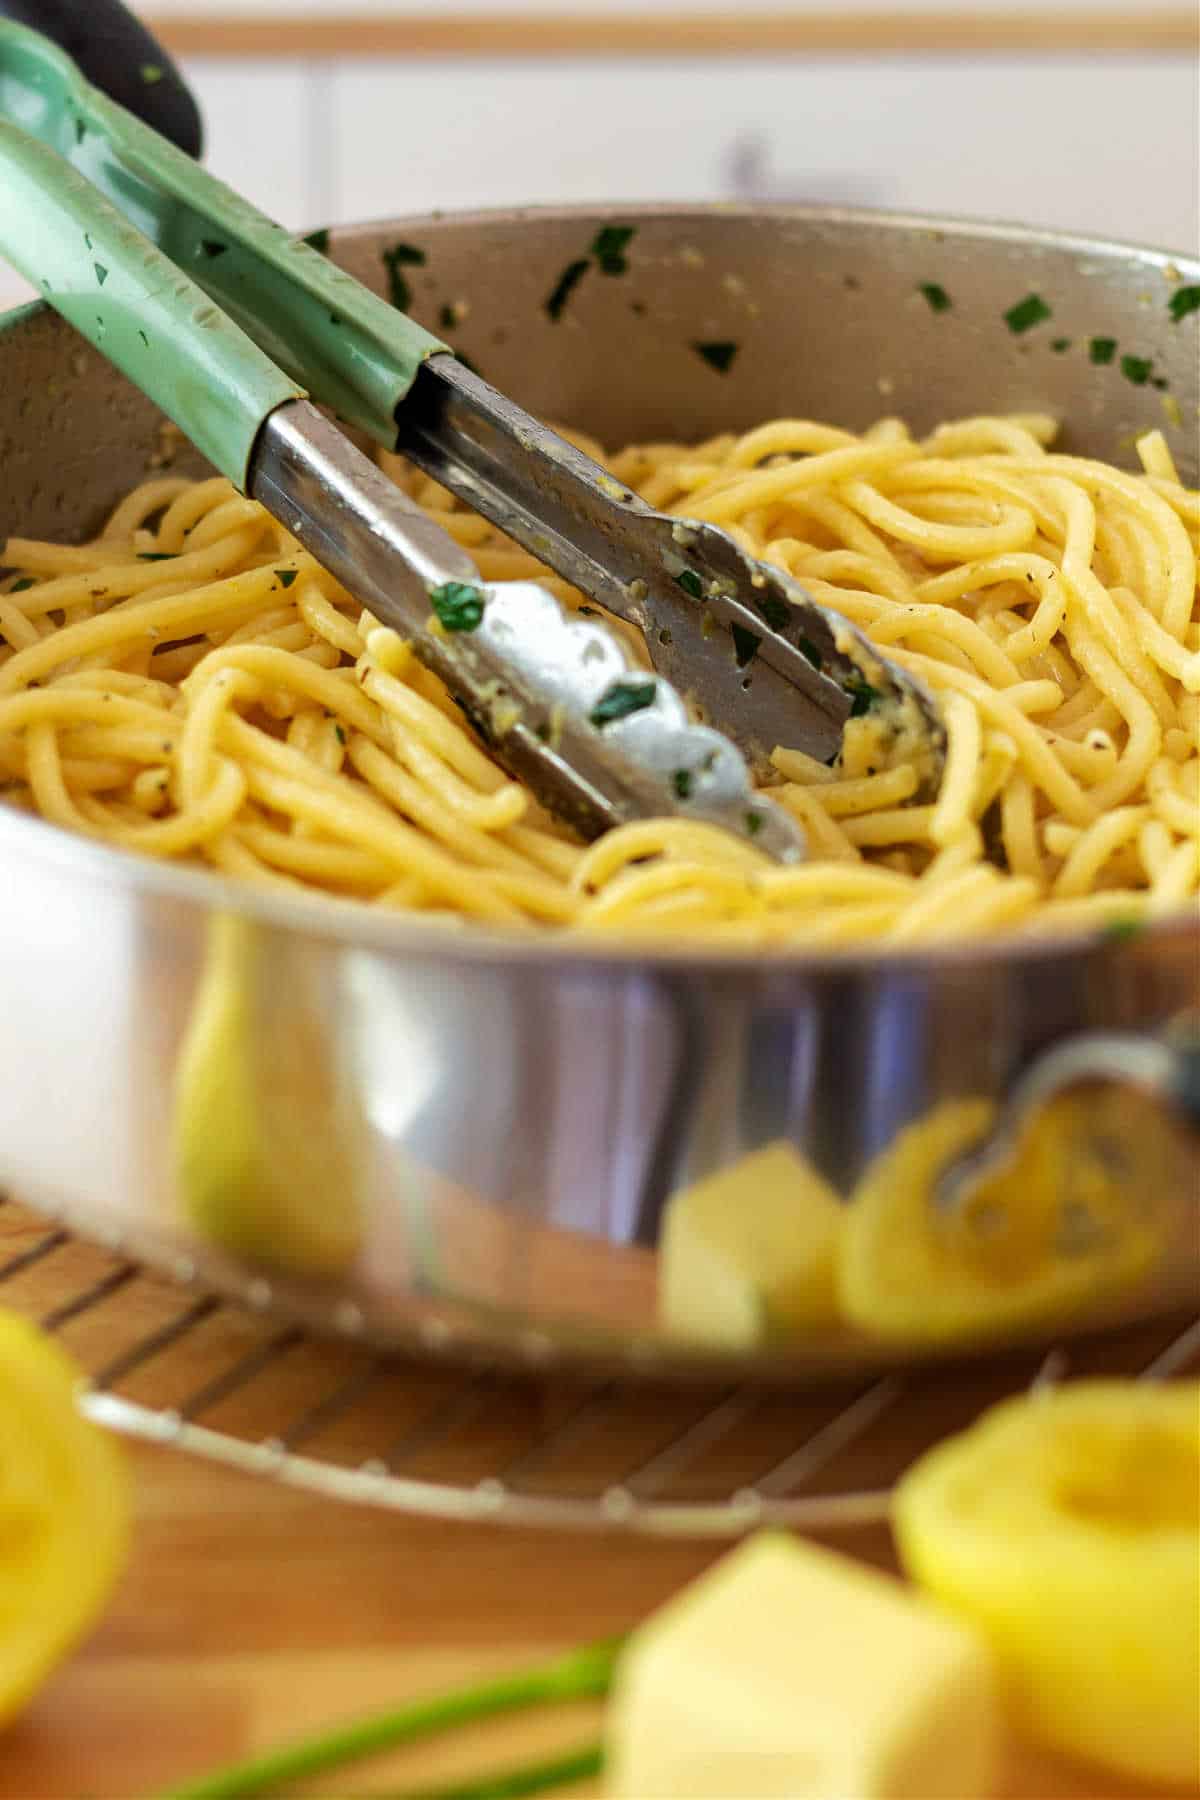 A saute pan full of long, thick pasta with tongs in it and lemons and some butter in front.